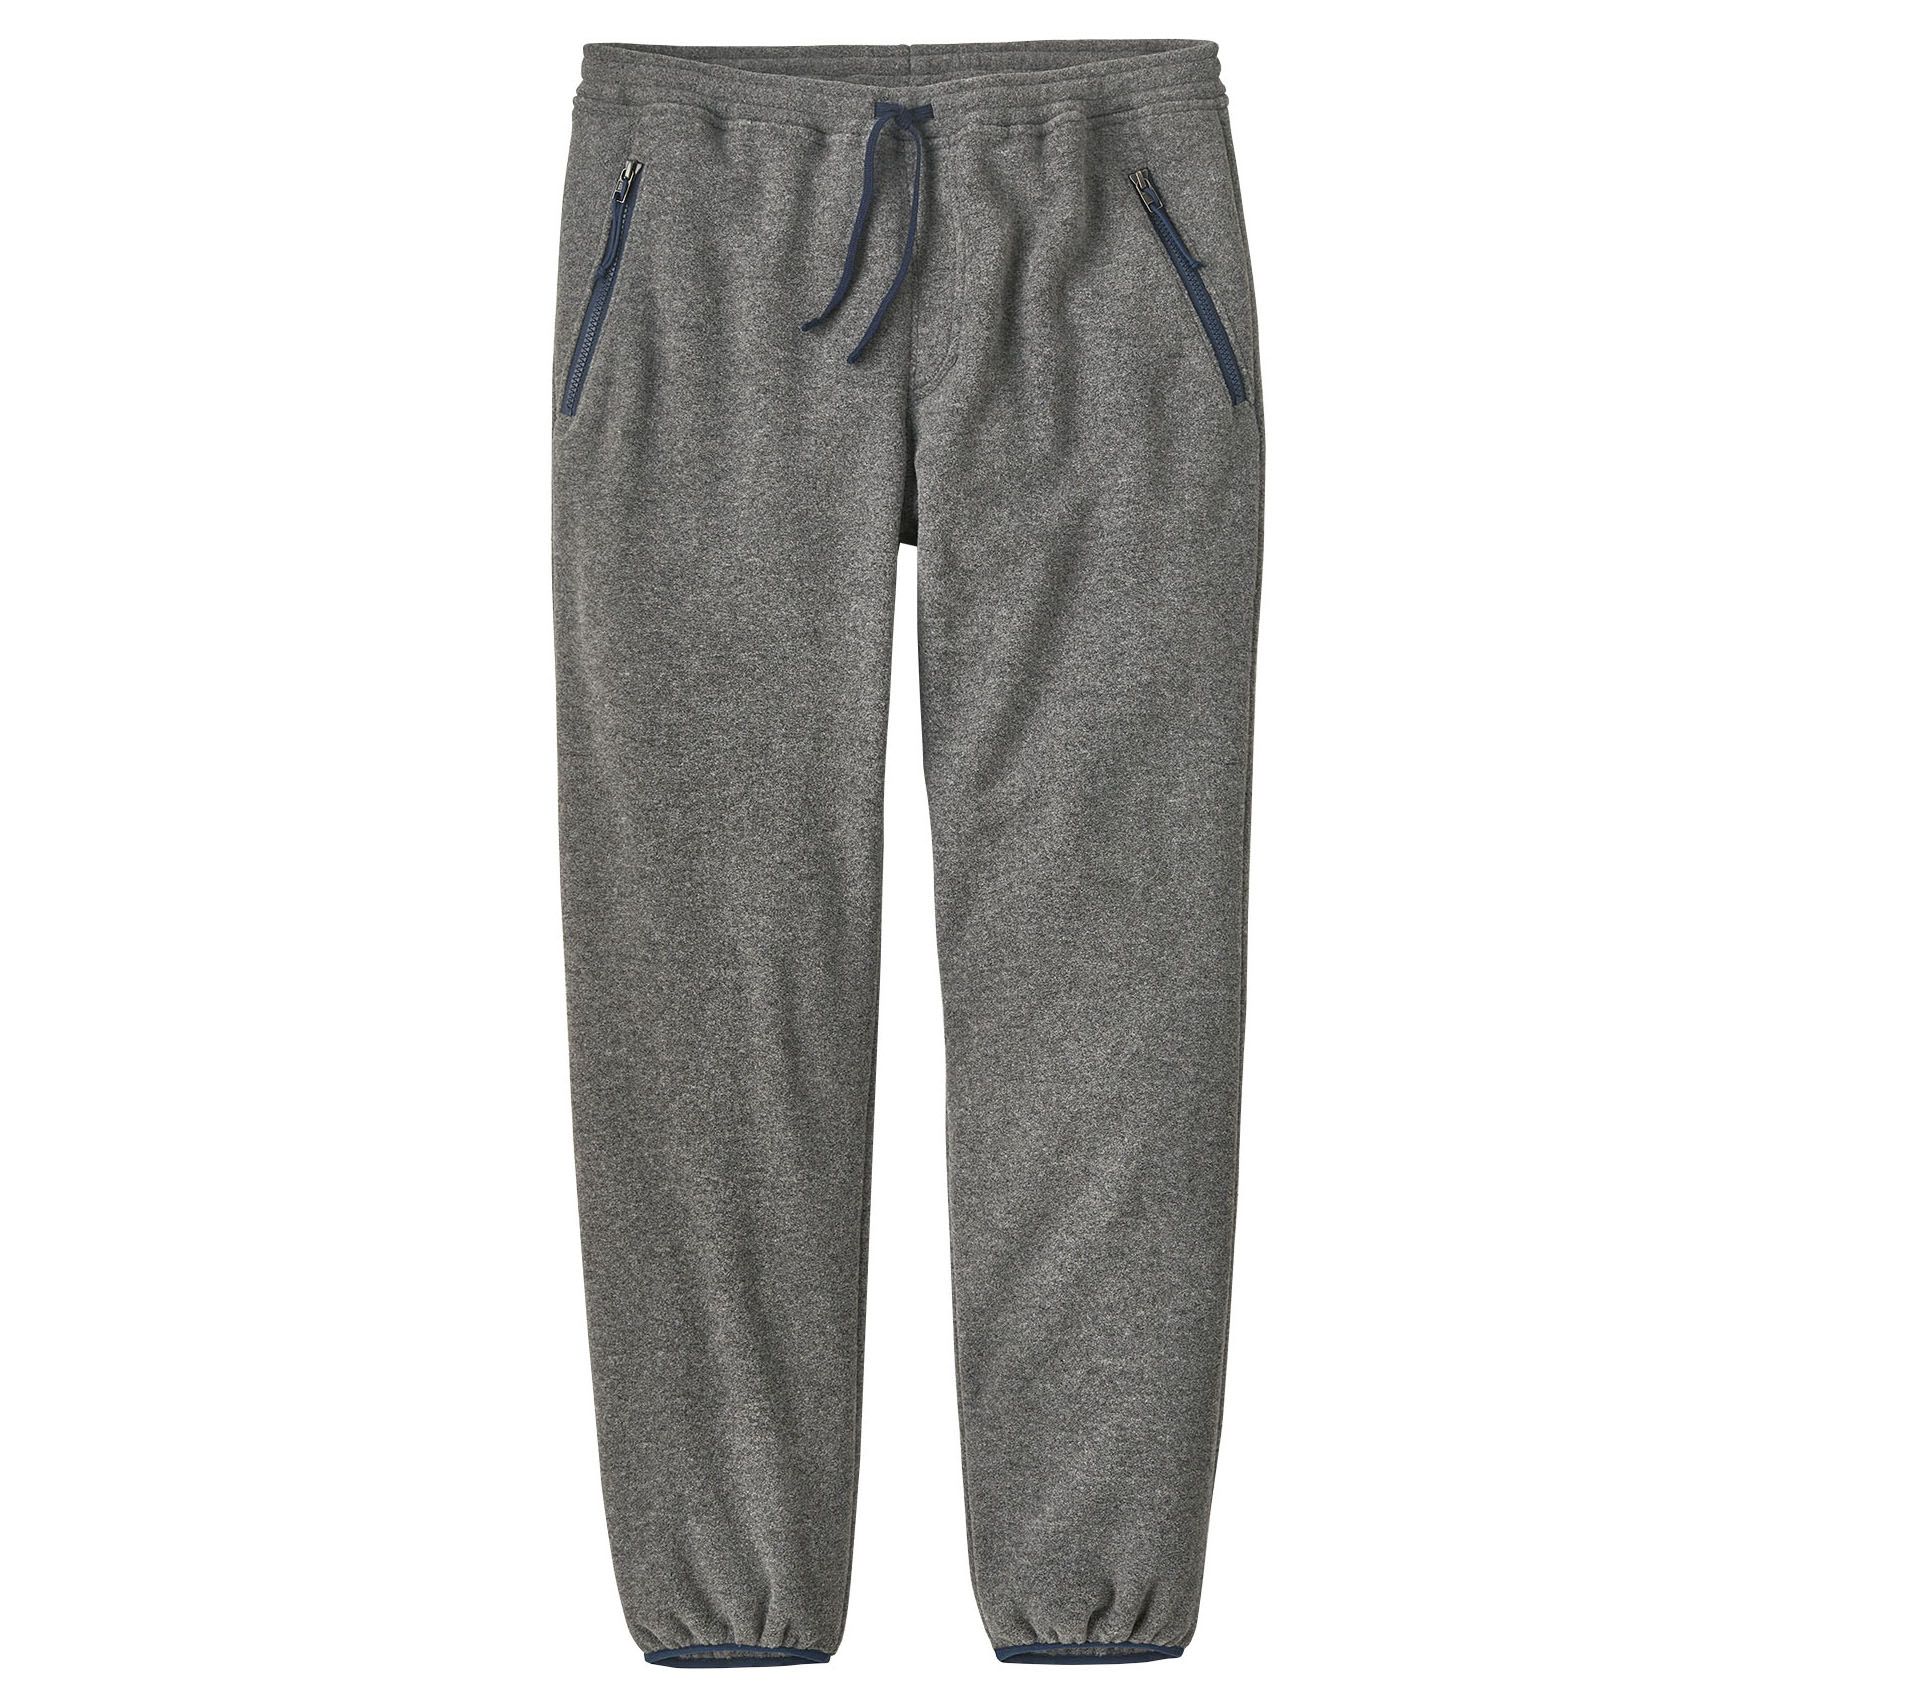 SYNCH PANT